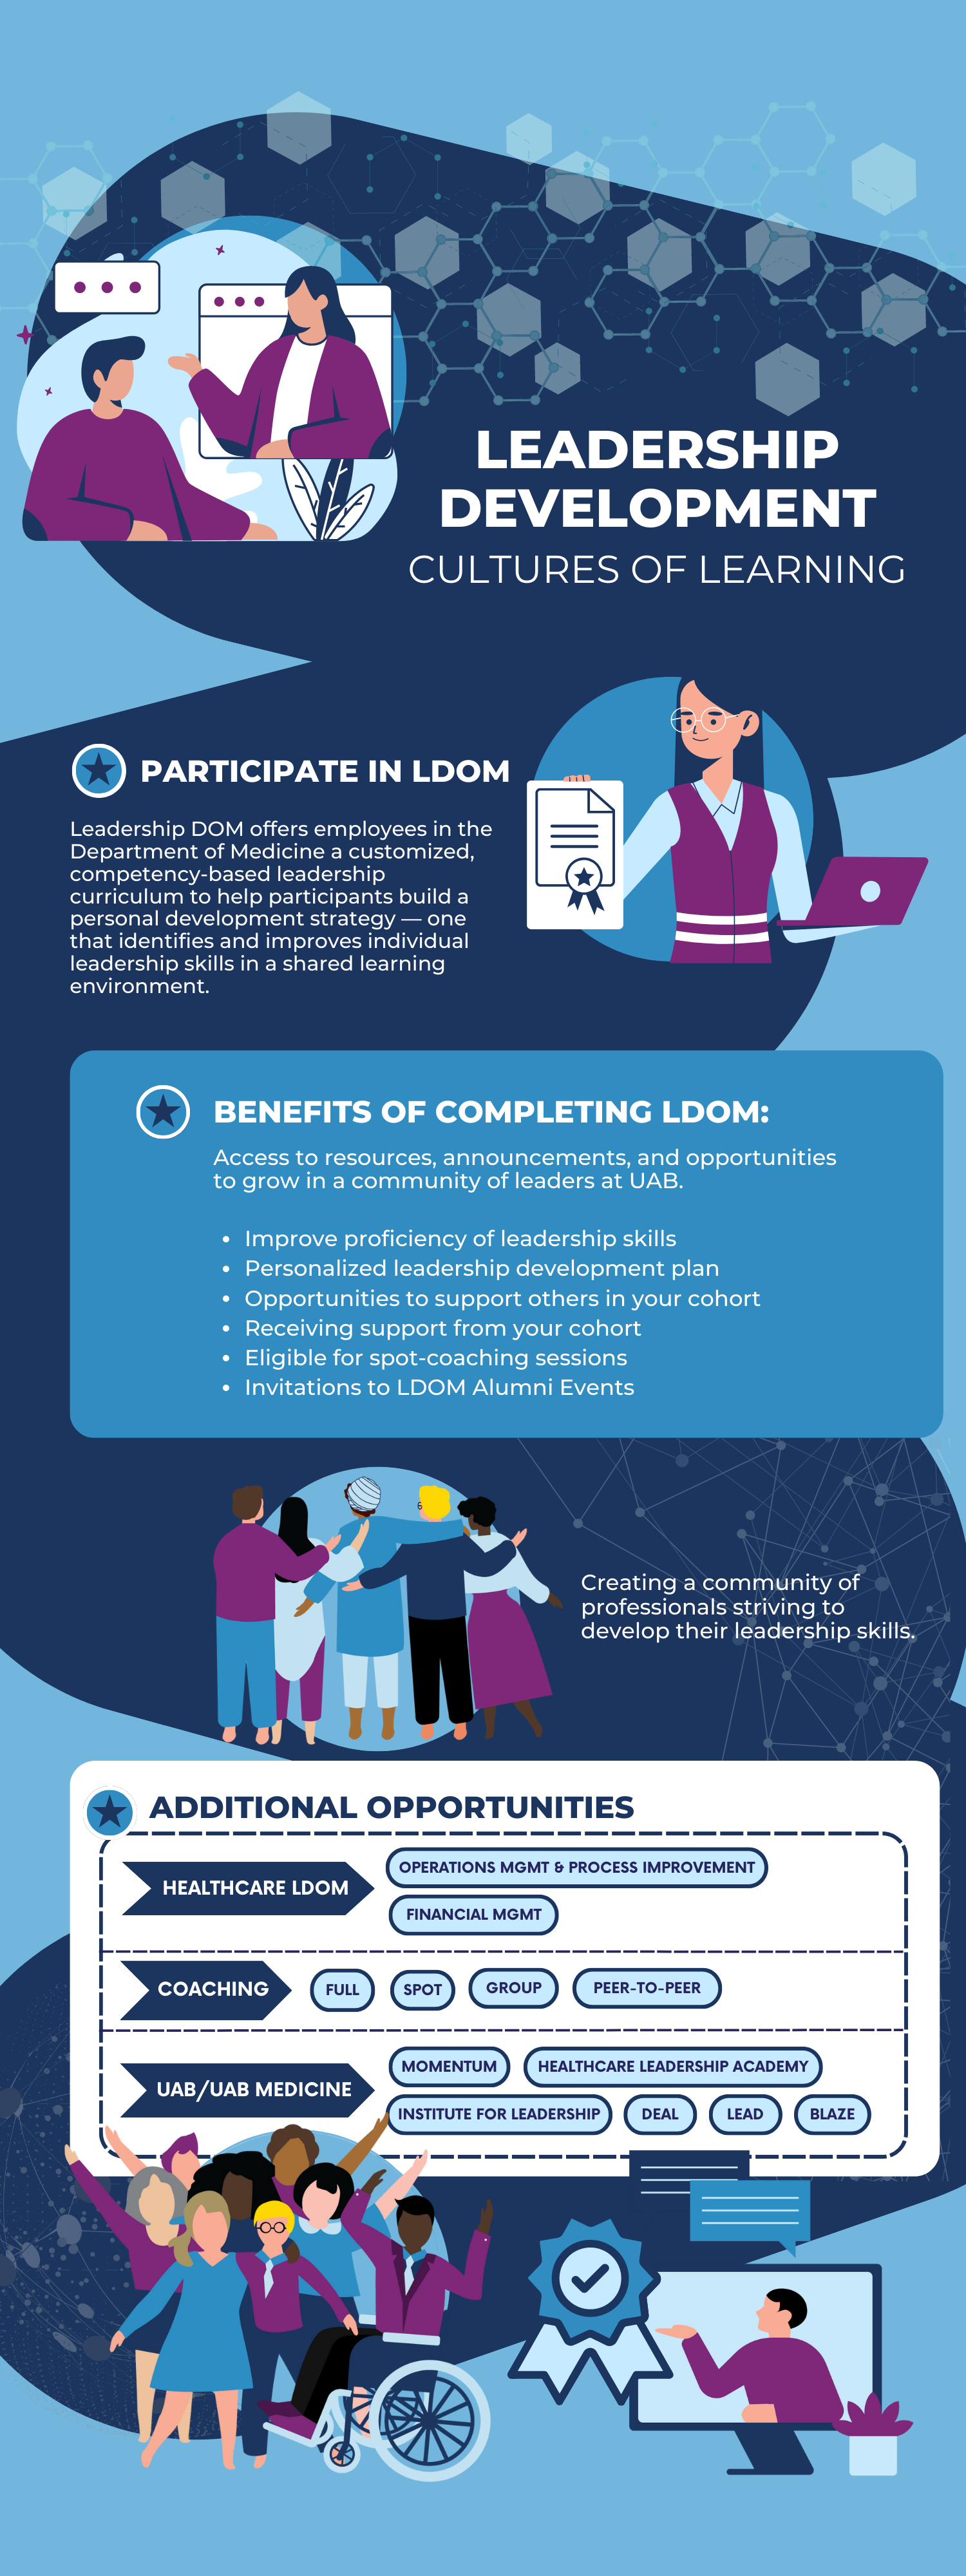 leadership development cultures of learning infographic